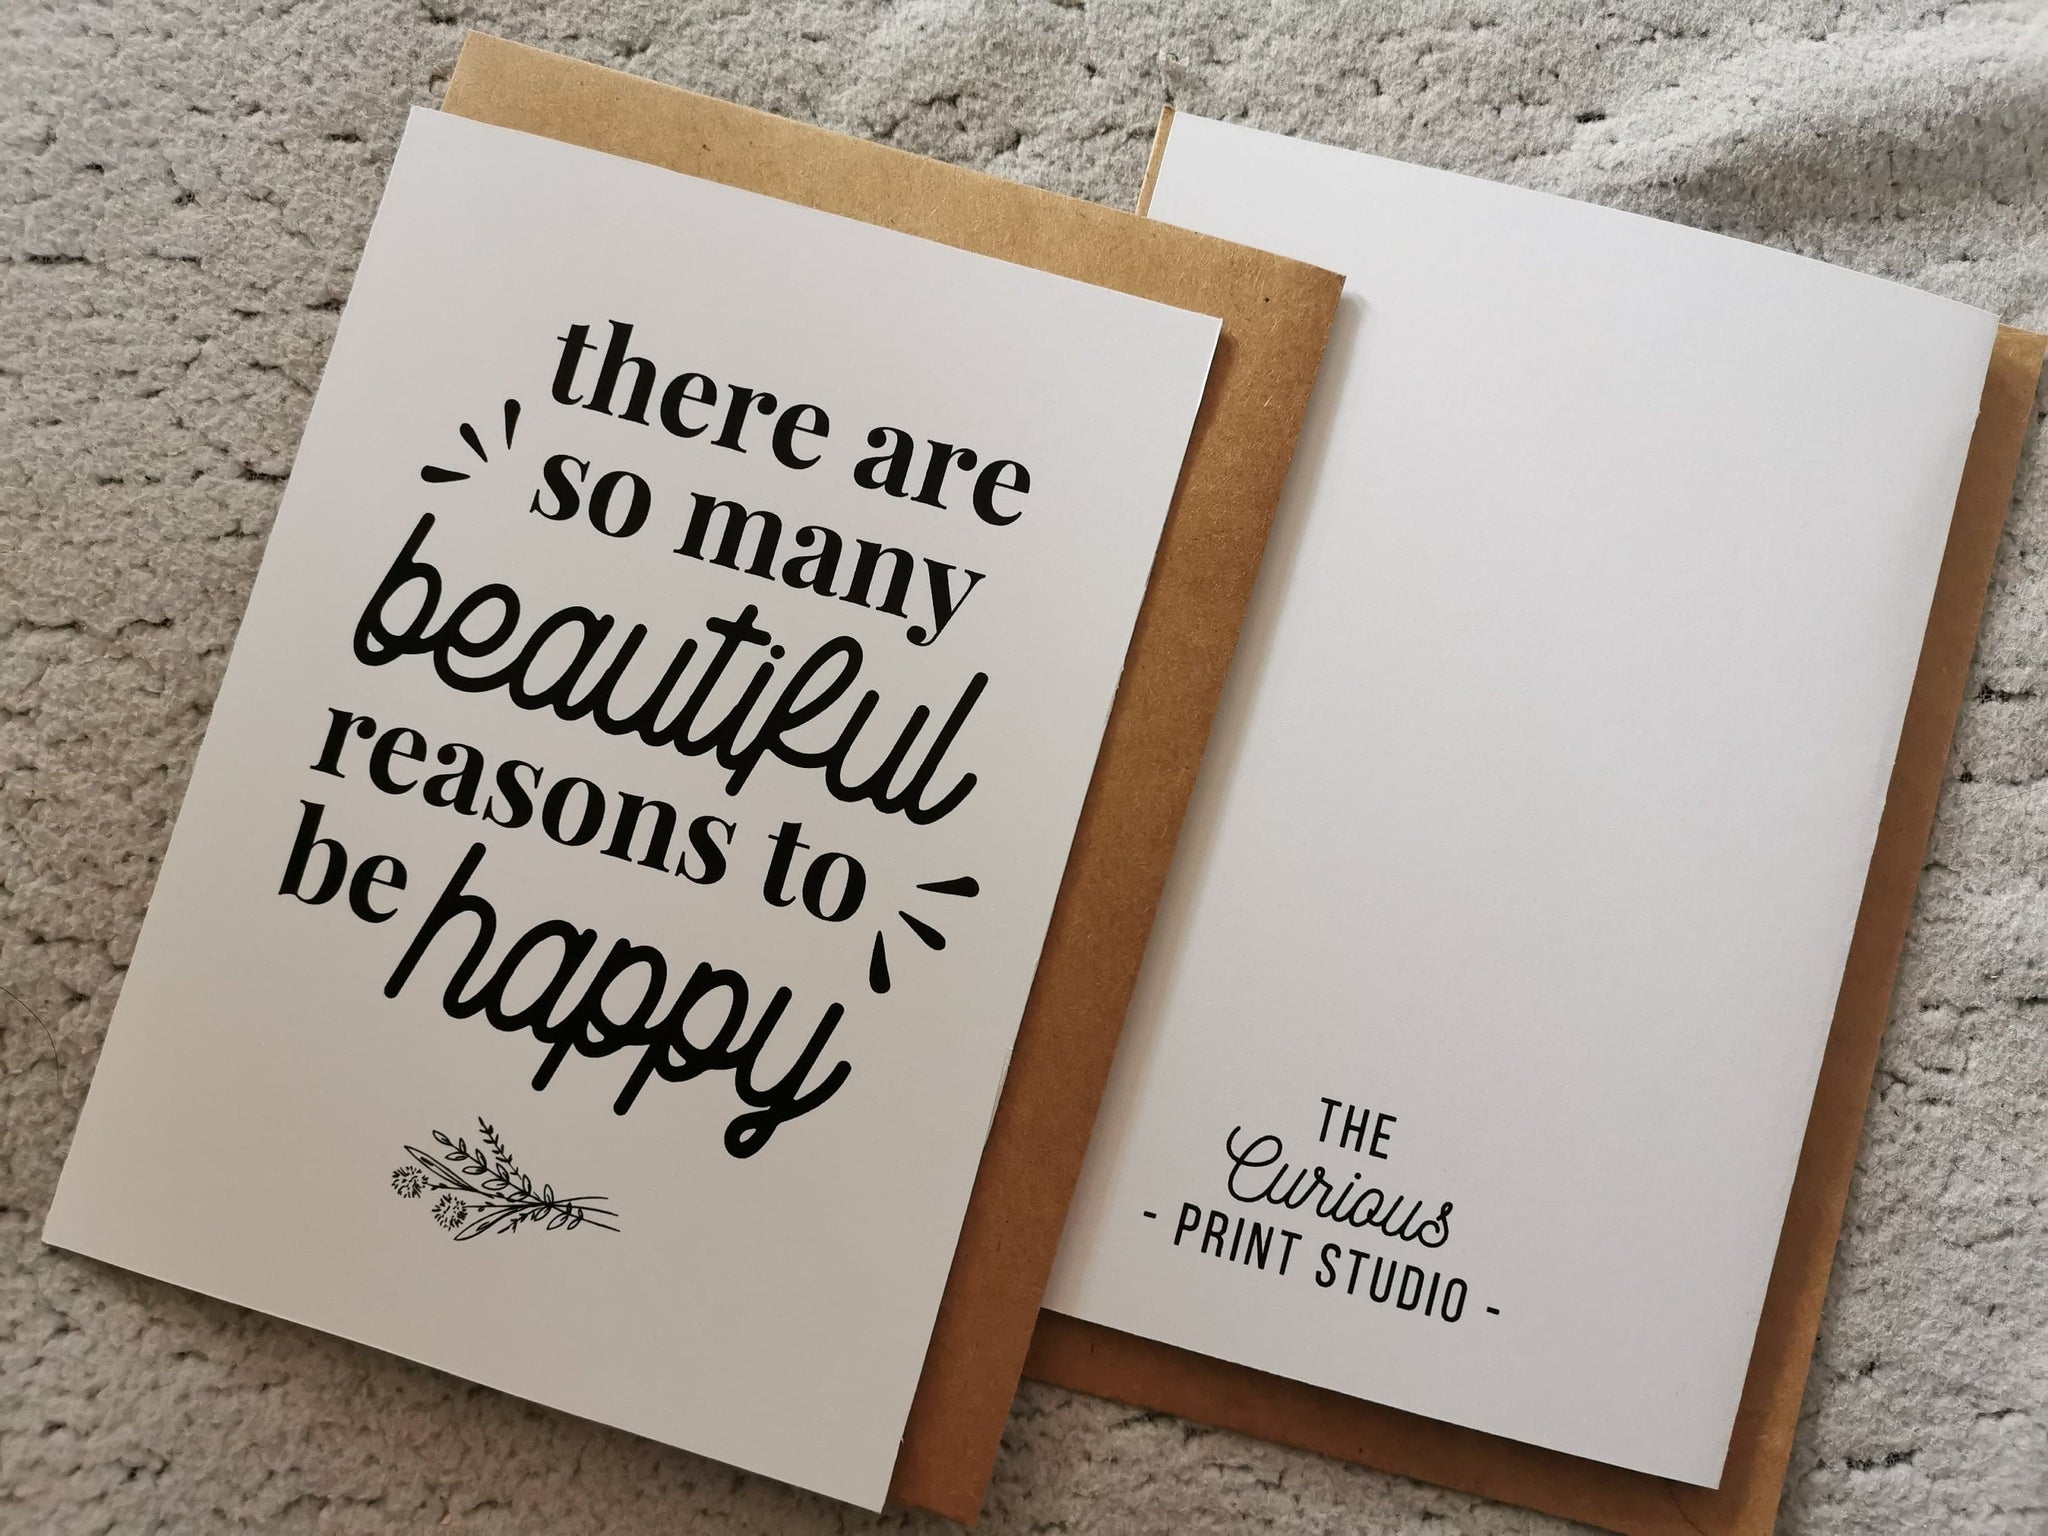 Beautiful Reasons To Be Happy | 4x5' or 5x7' Card